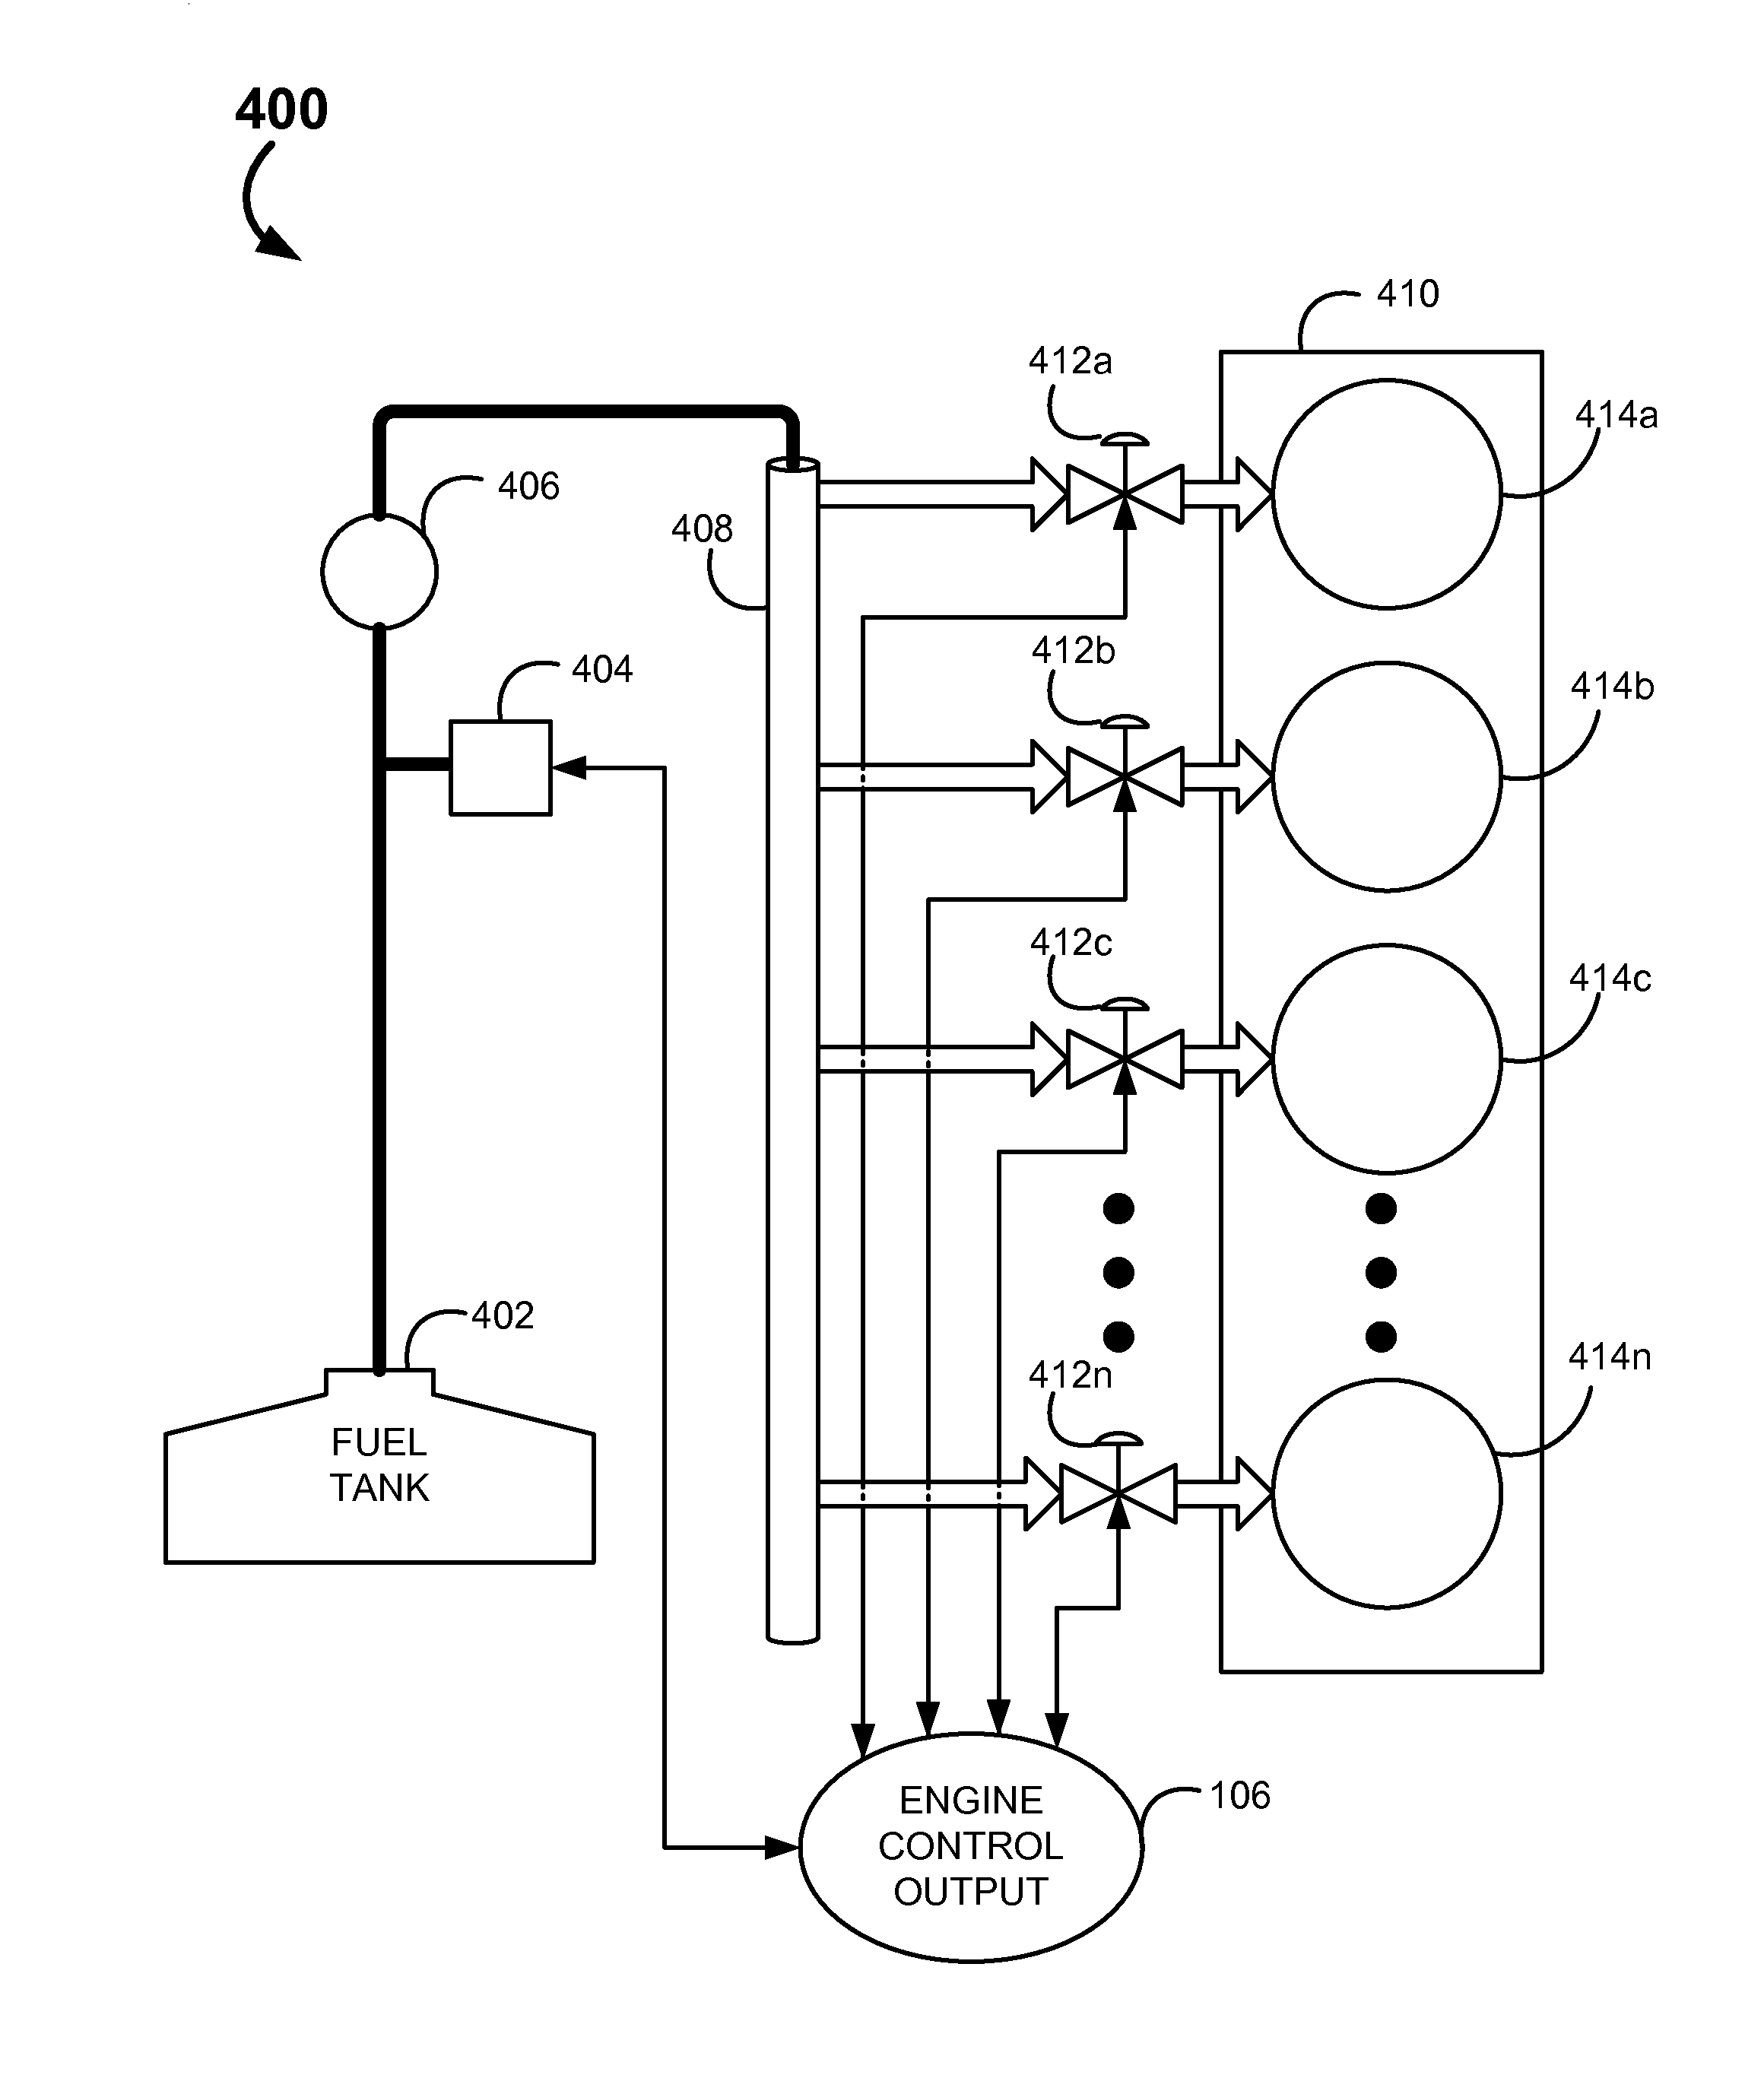 System and Methods for Stoichiometric Compression Ignition Engine Control